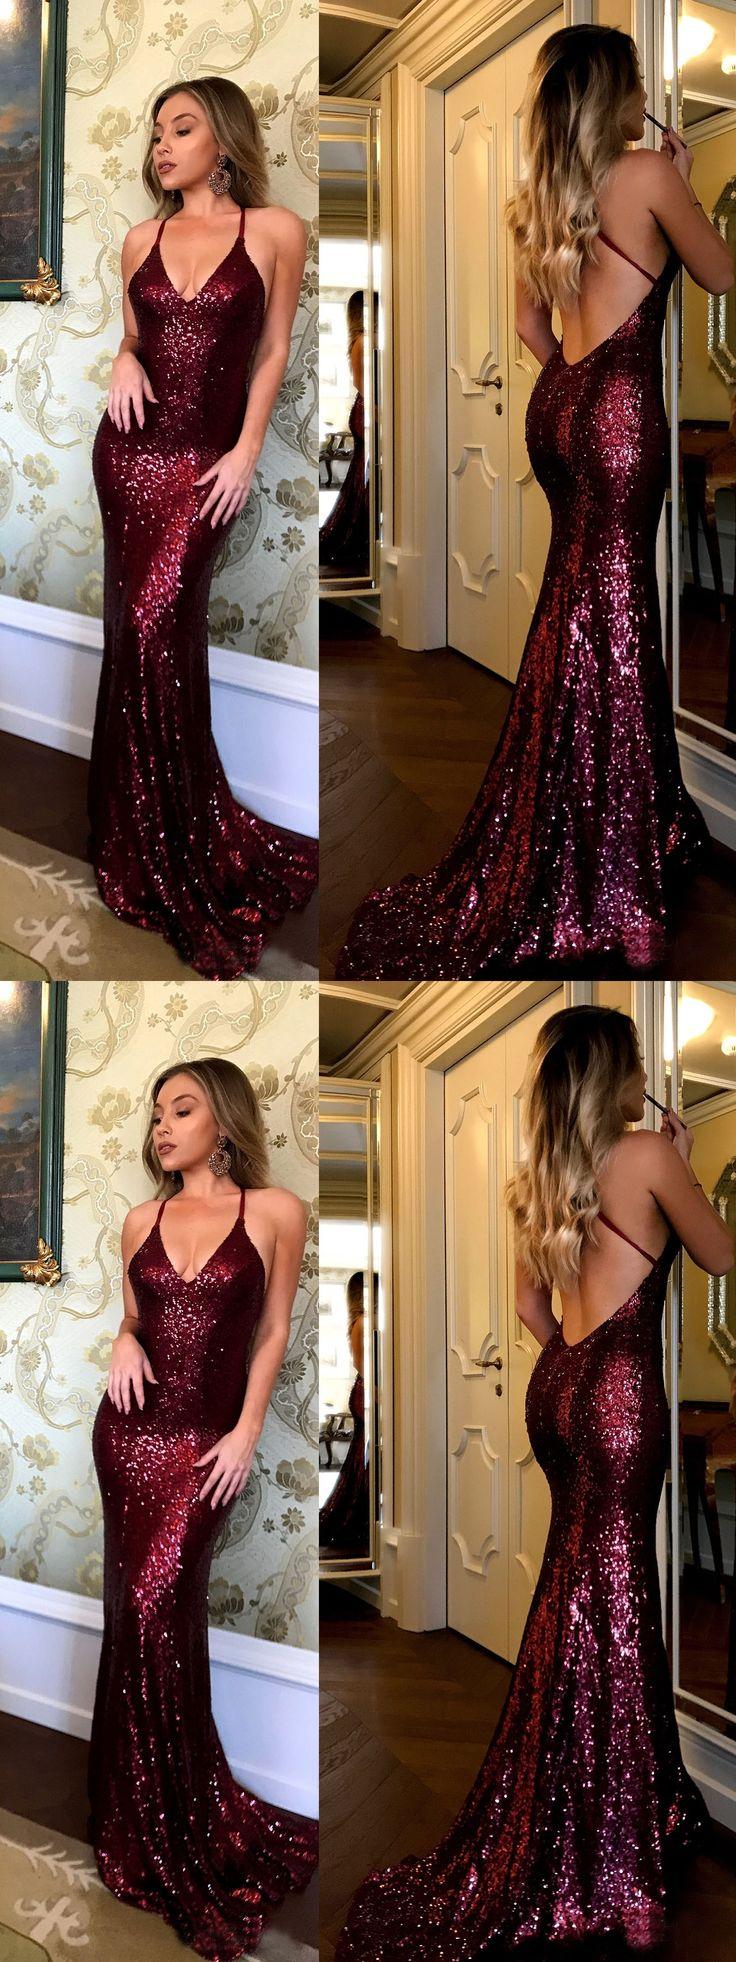 Mariage - Spaghetti Strap V-neck Burgundy Sequins Lace Mermaid Prom Dresses APD2835